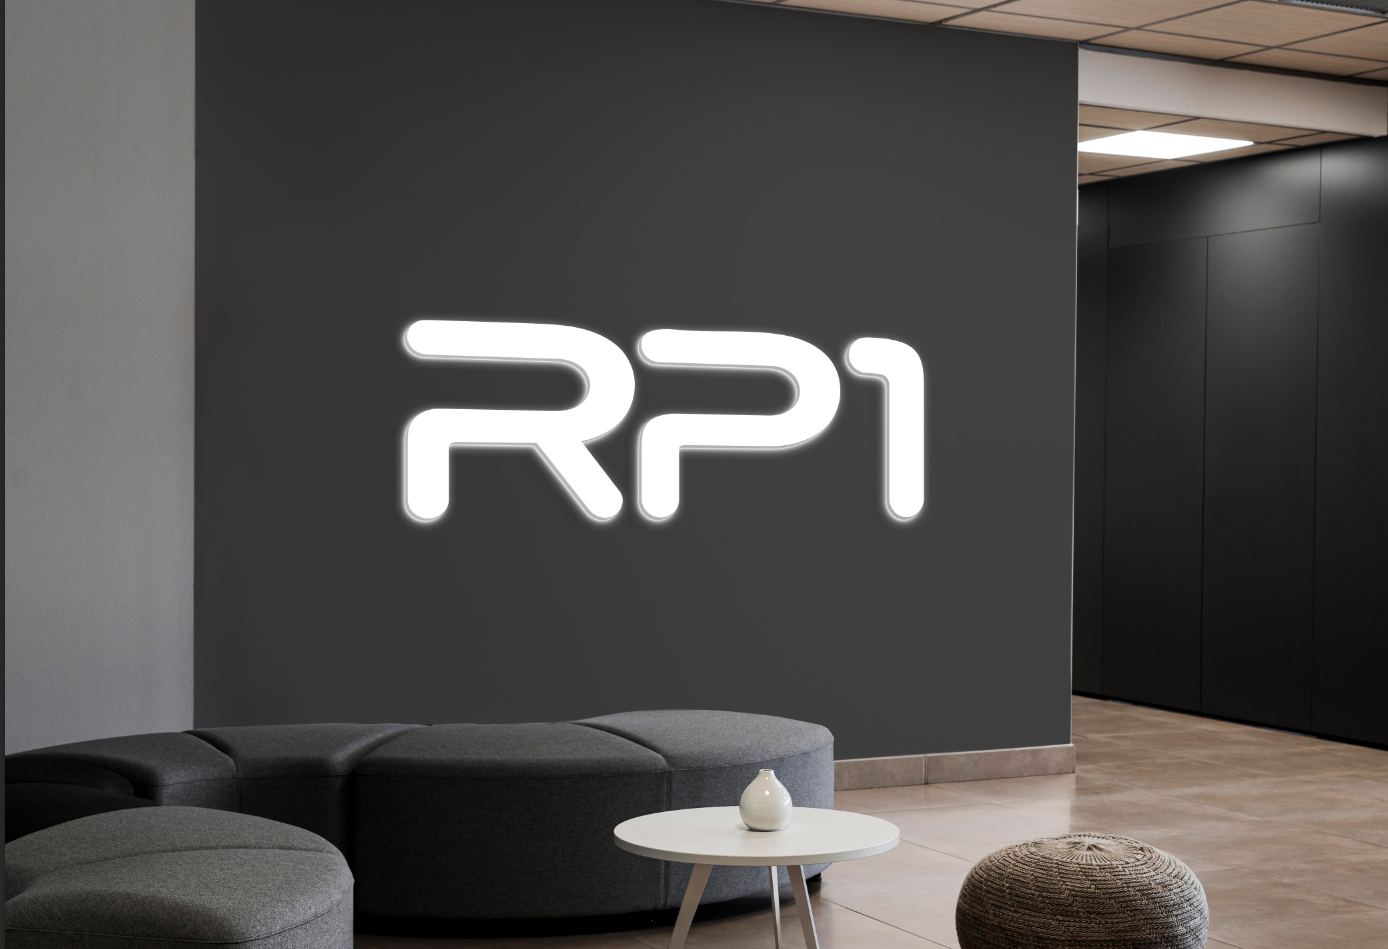 Business signage for RFI